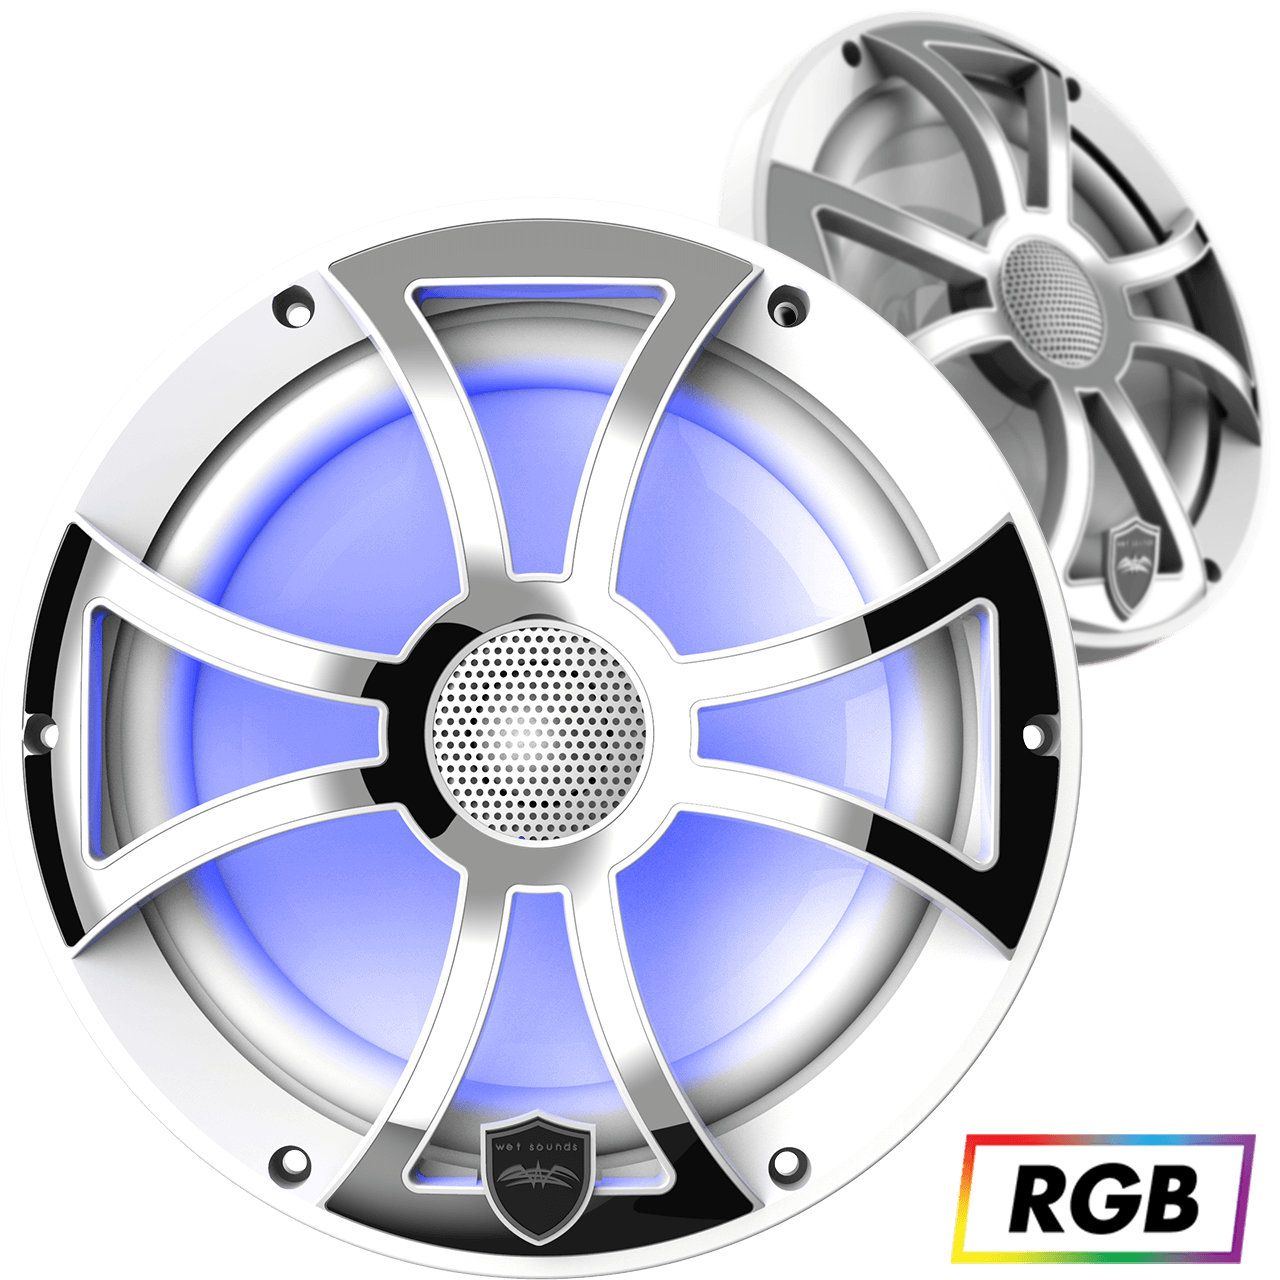 REVO 8-XS-W-SS White XS / Stainless Overlay Grille 8” Coaxial Speakers (pair)